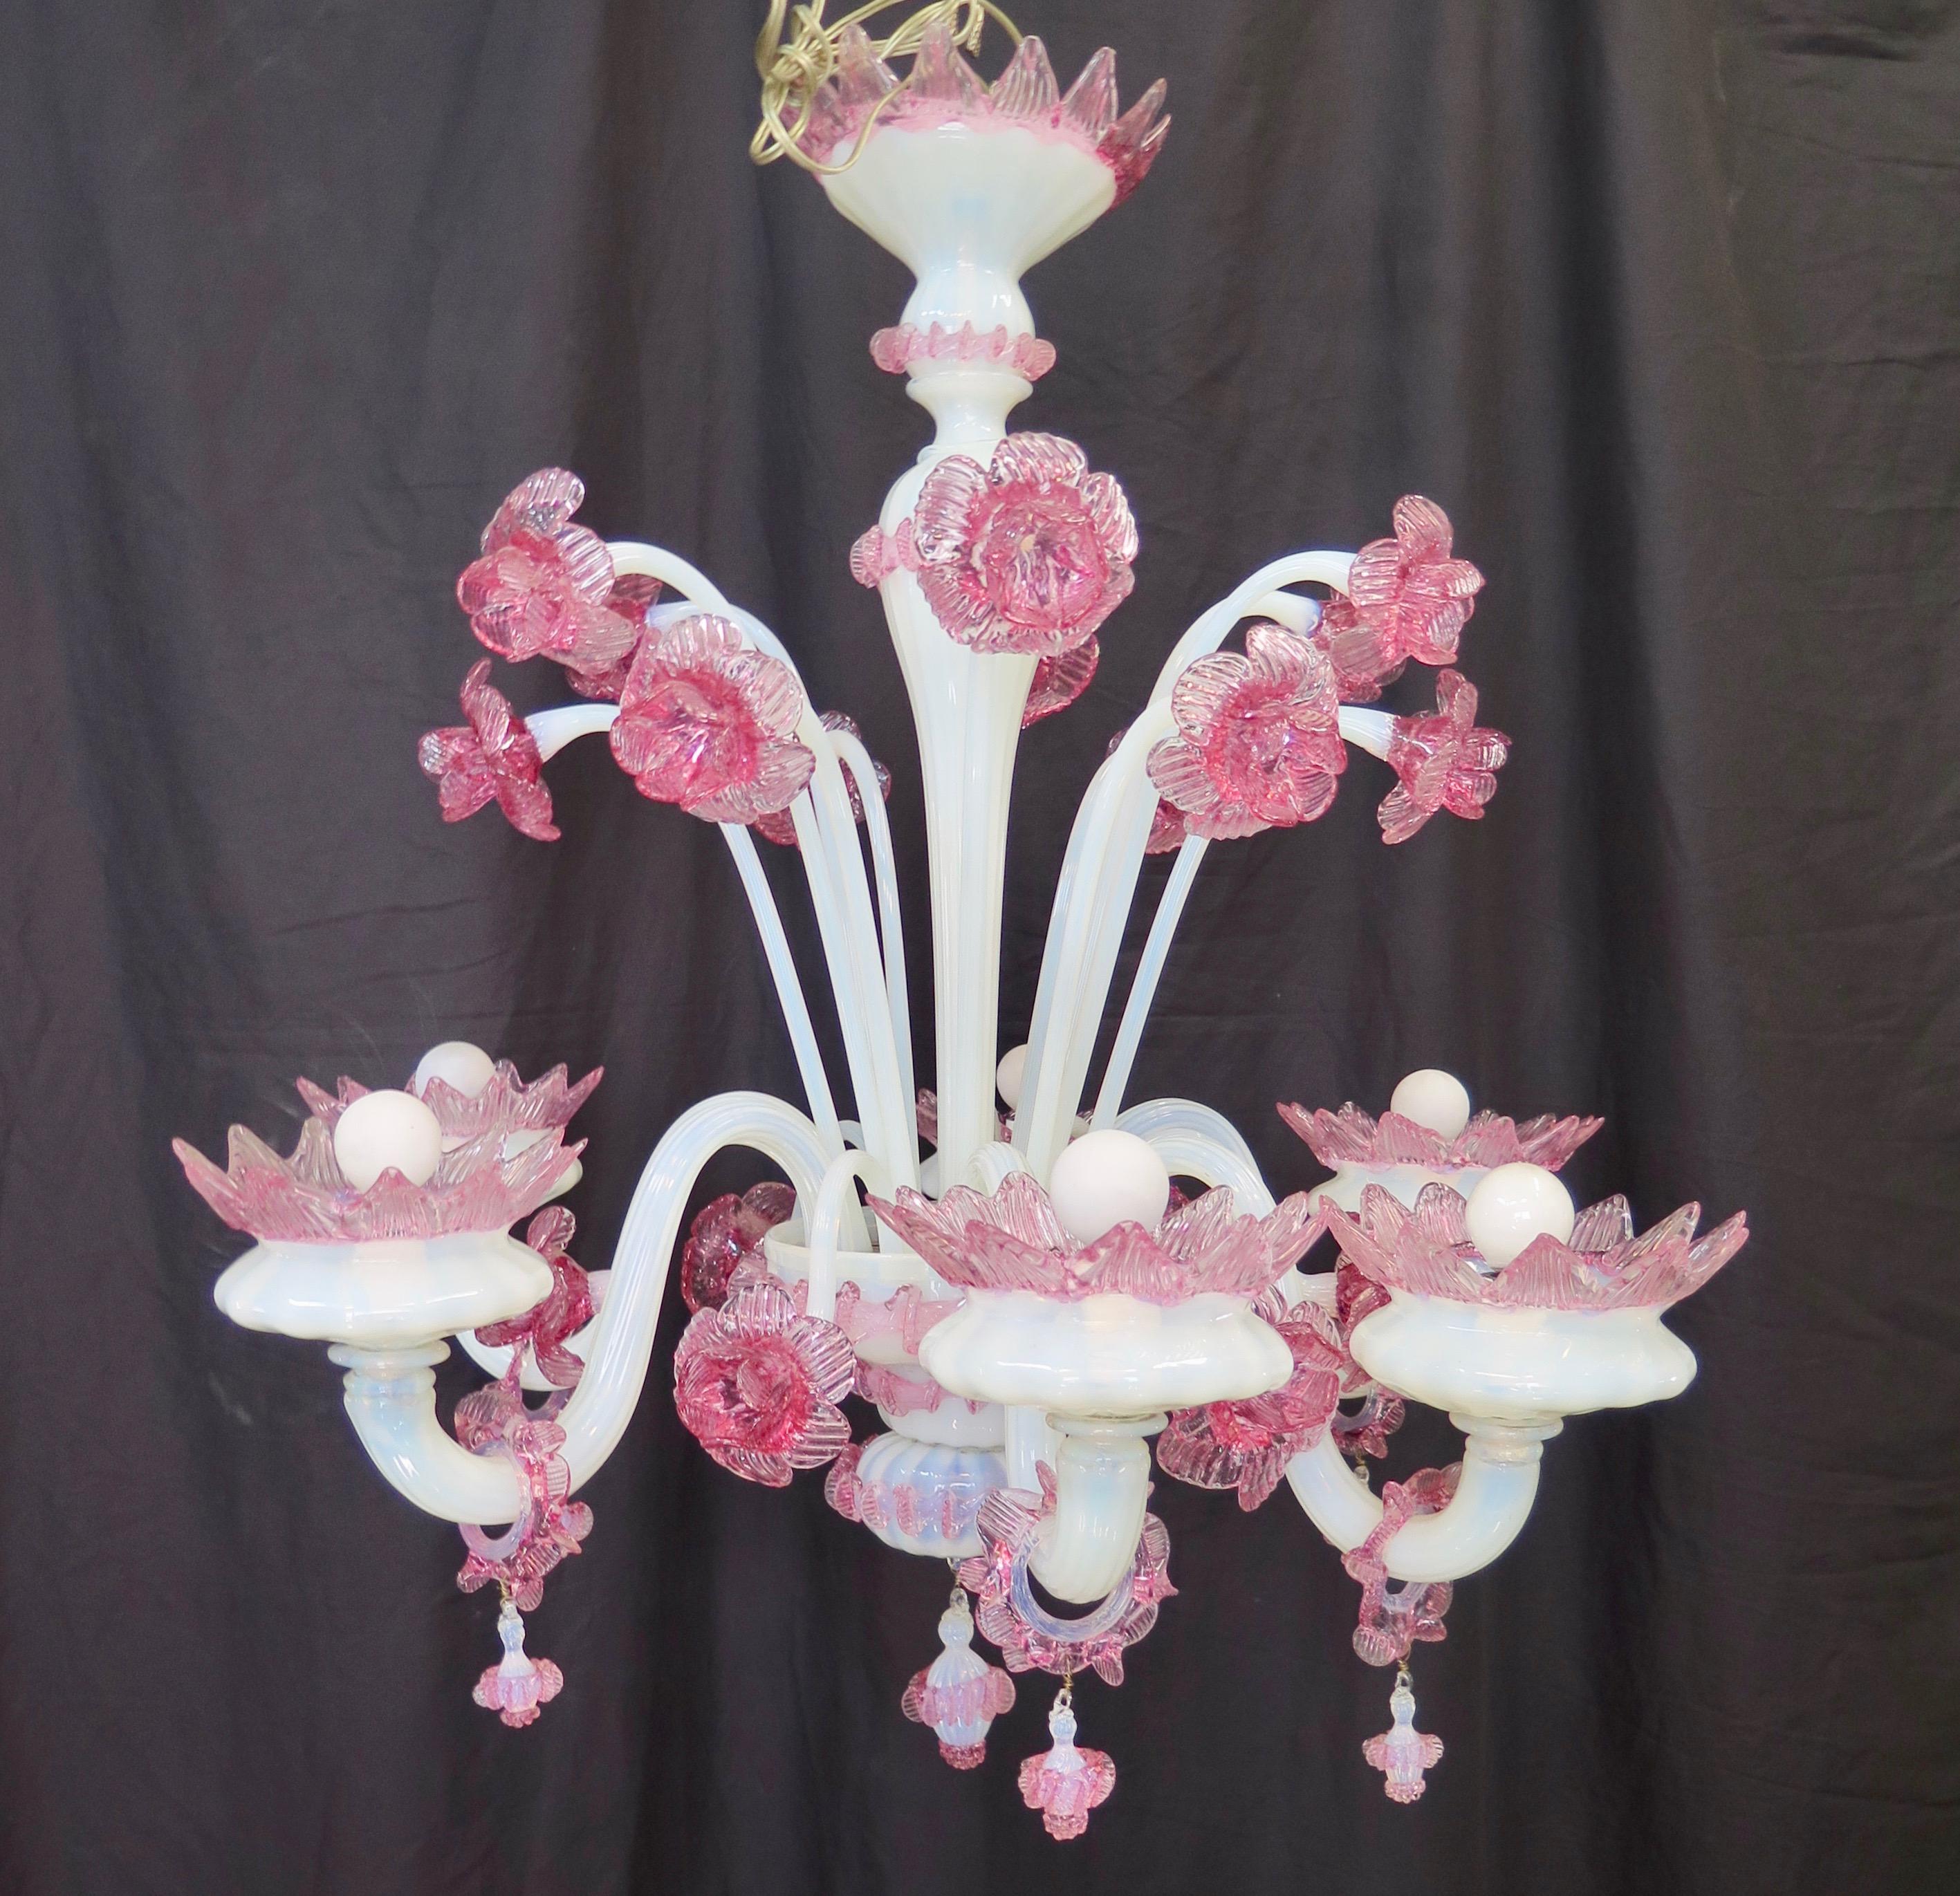 This stylish vintage Venetian glass chandelier is beautifully designed with hand blown 